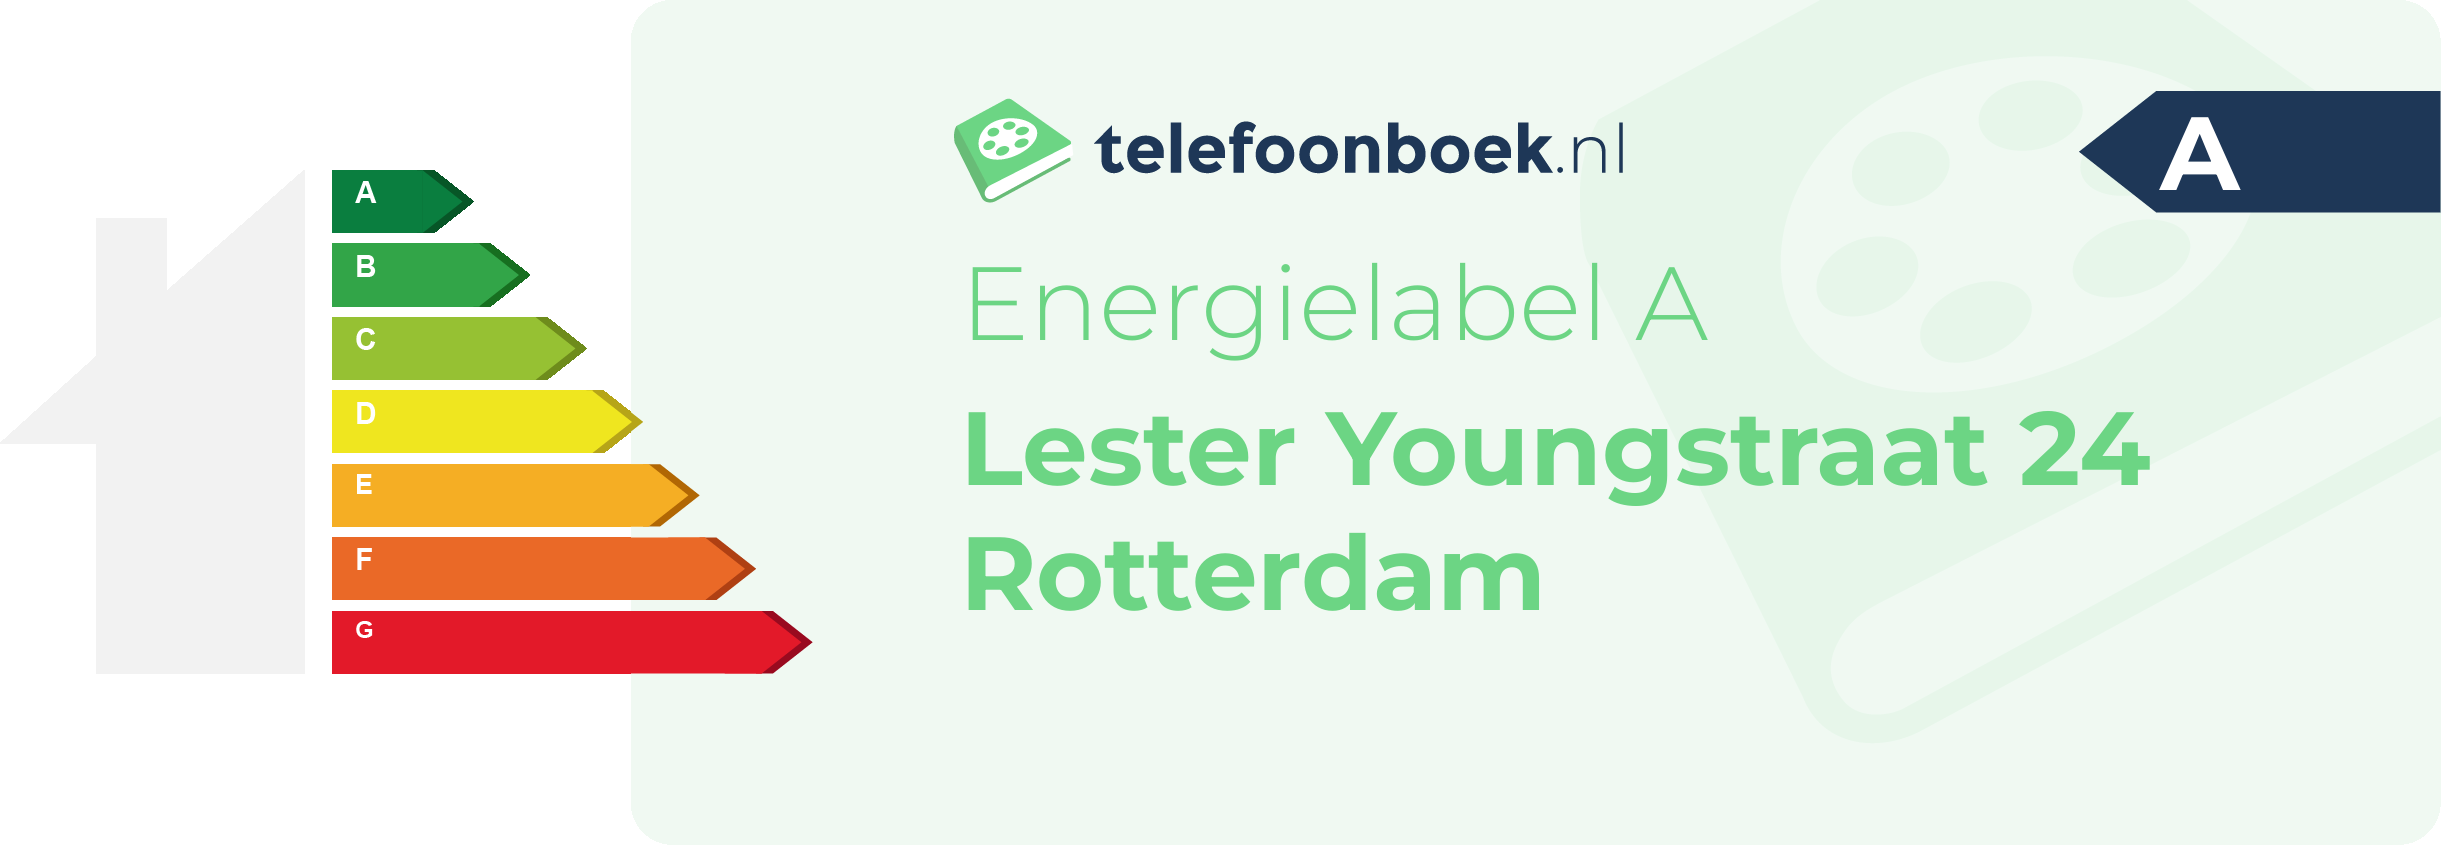 Energielabel Lester Youngstraat 24 Rotterdam